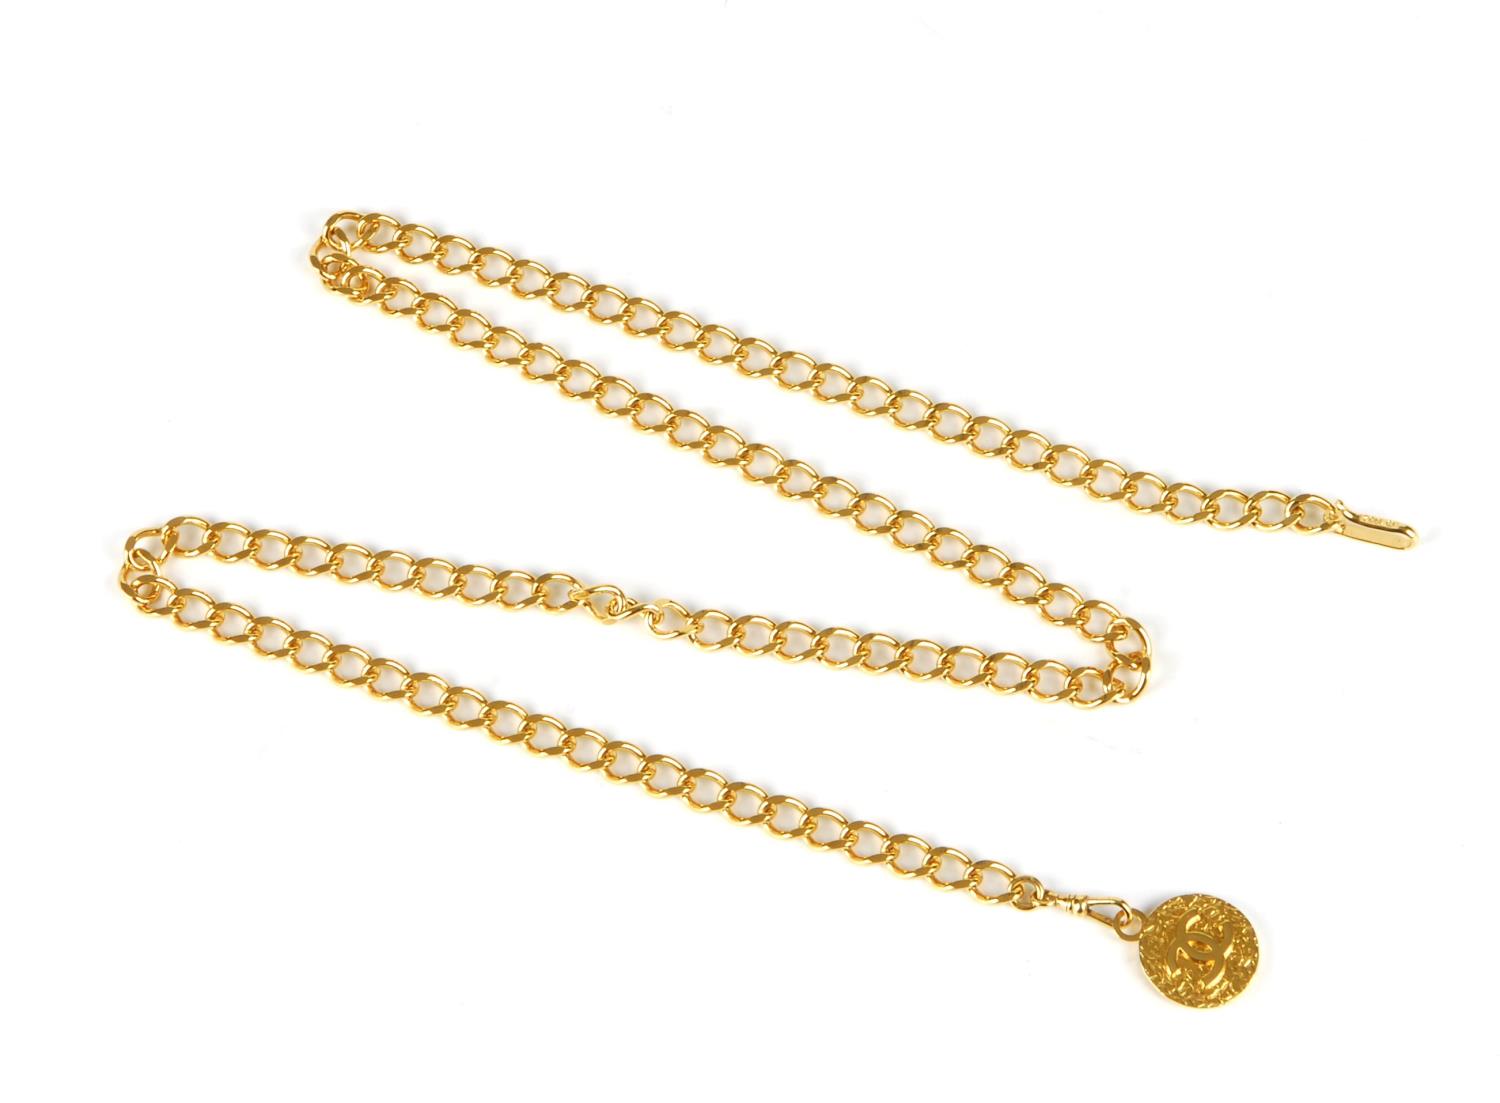 CHANEL - a chain belt. Featuring a gold-tone chain with a large logo CC medallion hanging at one end - Image 2 of 3